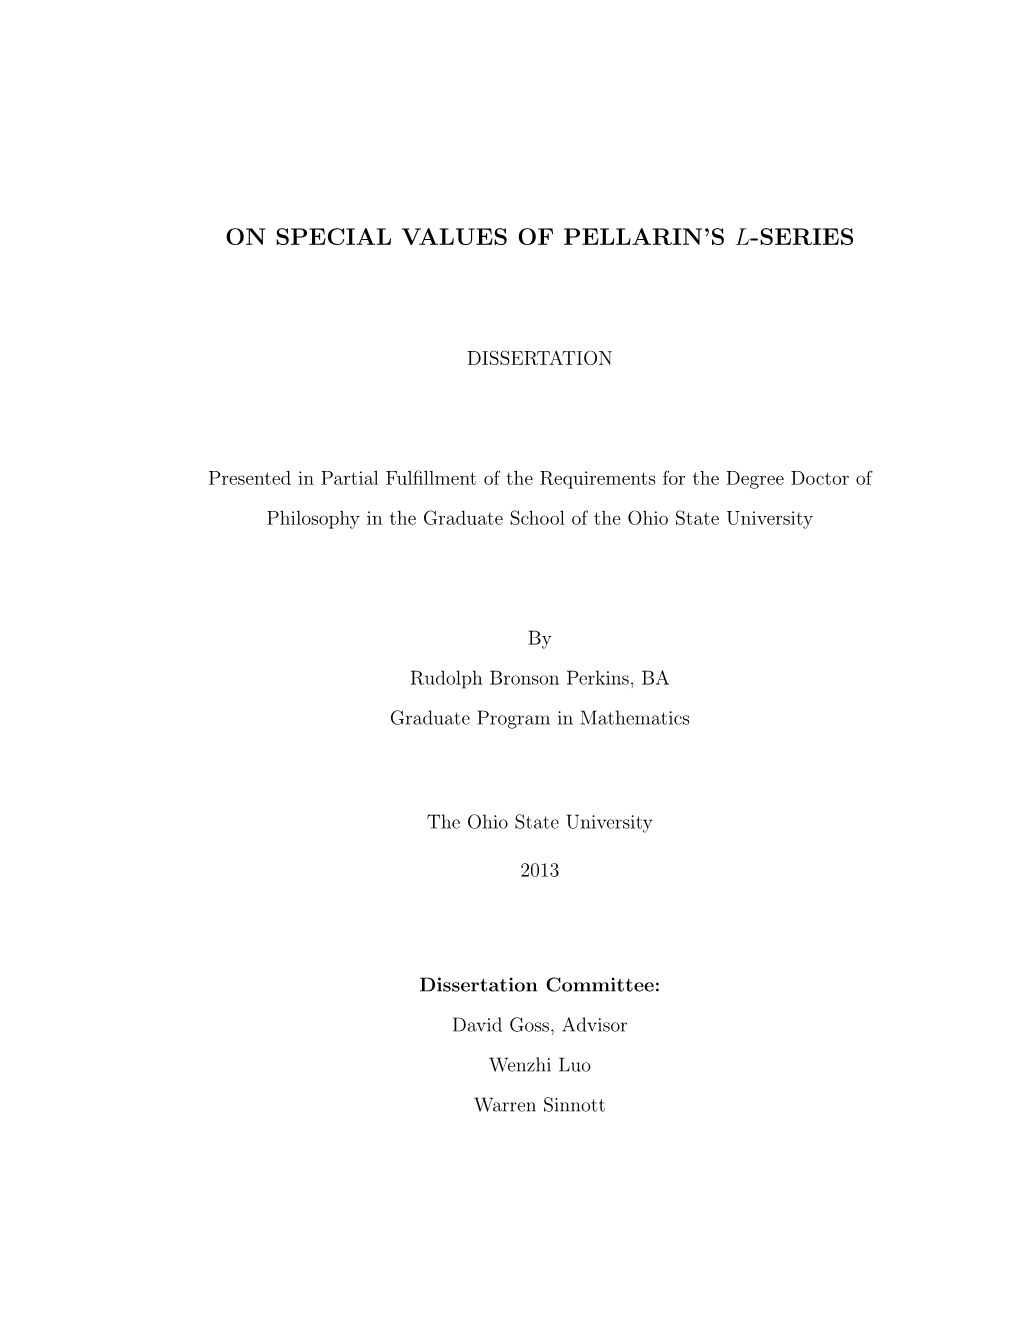 On Special Values of Pellarin's L-Series